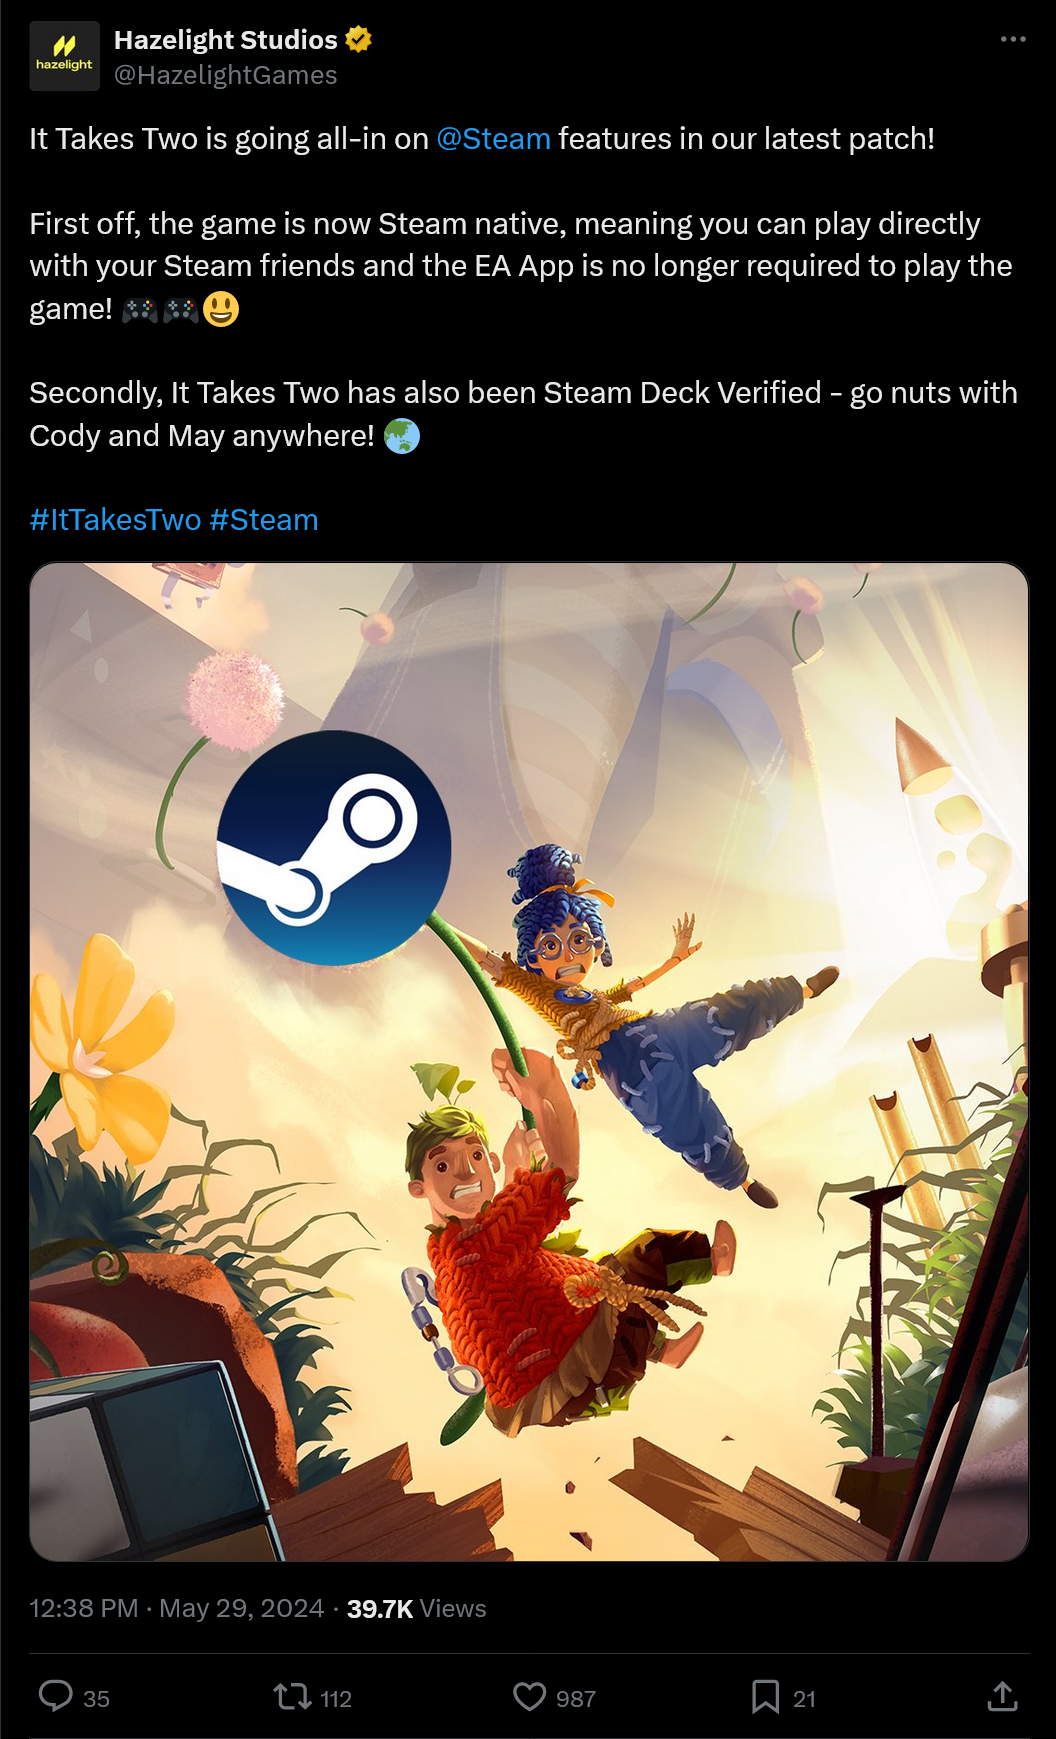 It Takes Two is going all-in on @Steam  features in our latest patch!  First off, the game is now Steam native, meaning you can play directly with your Steam friends and the EA App is no longer required to play the game! ???  Secondly, It Takes Two has also been Steam Deck Verified - go nuts with Cody and May anywhere! ?  #ItTakesTwo #Steam